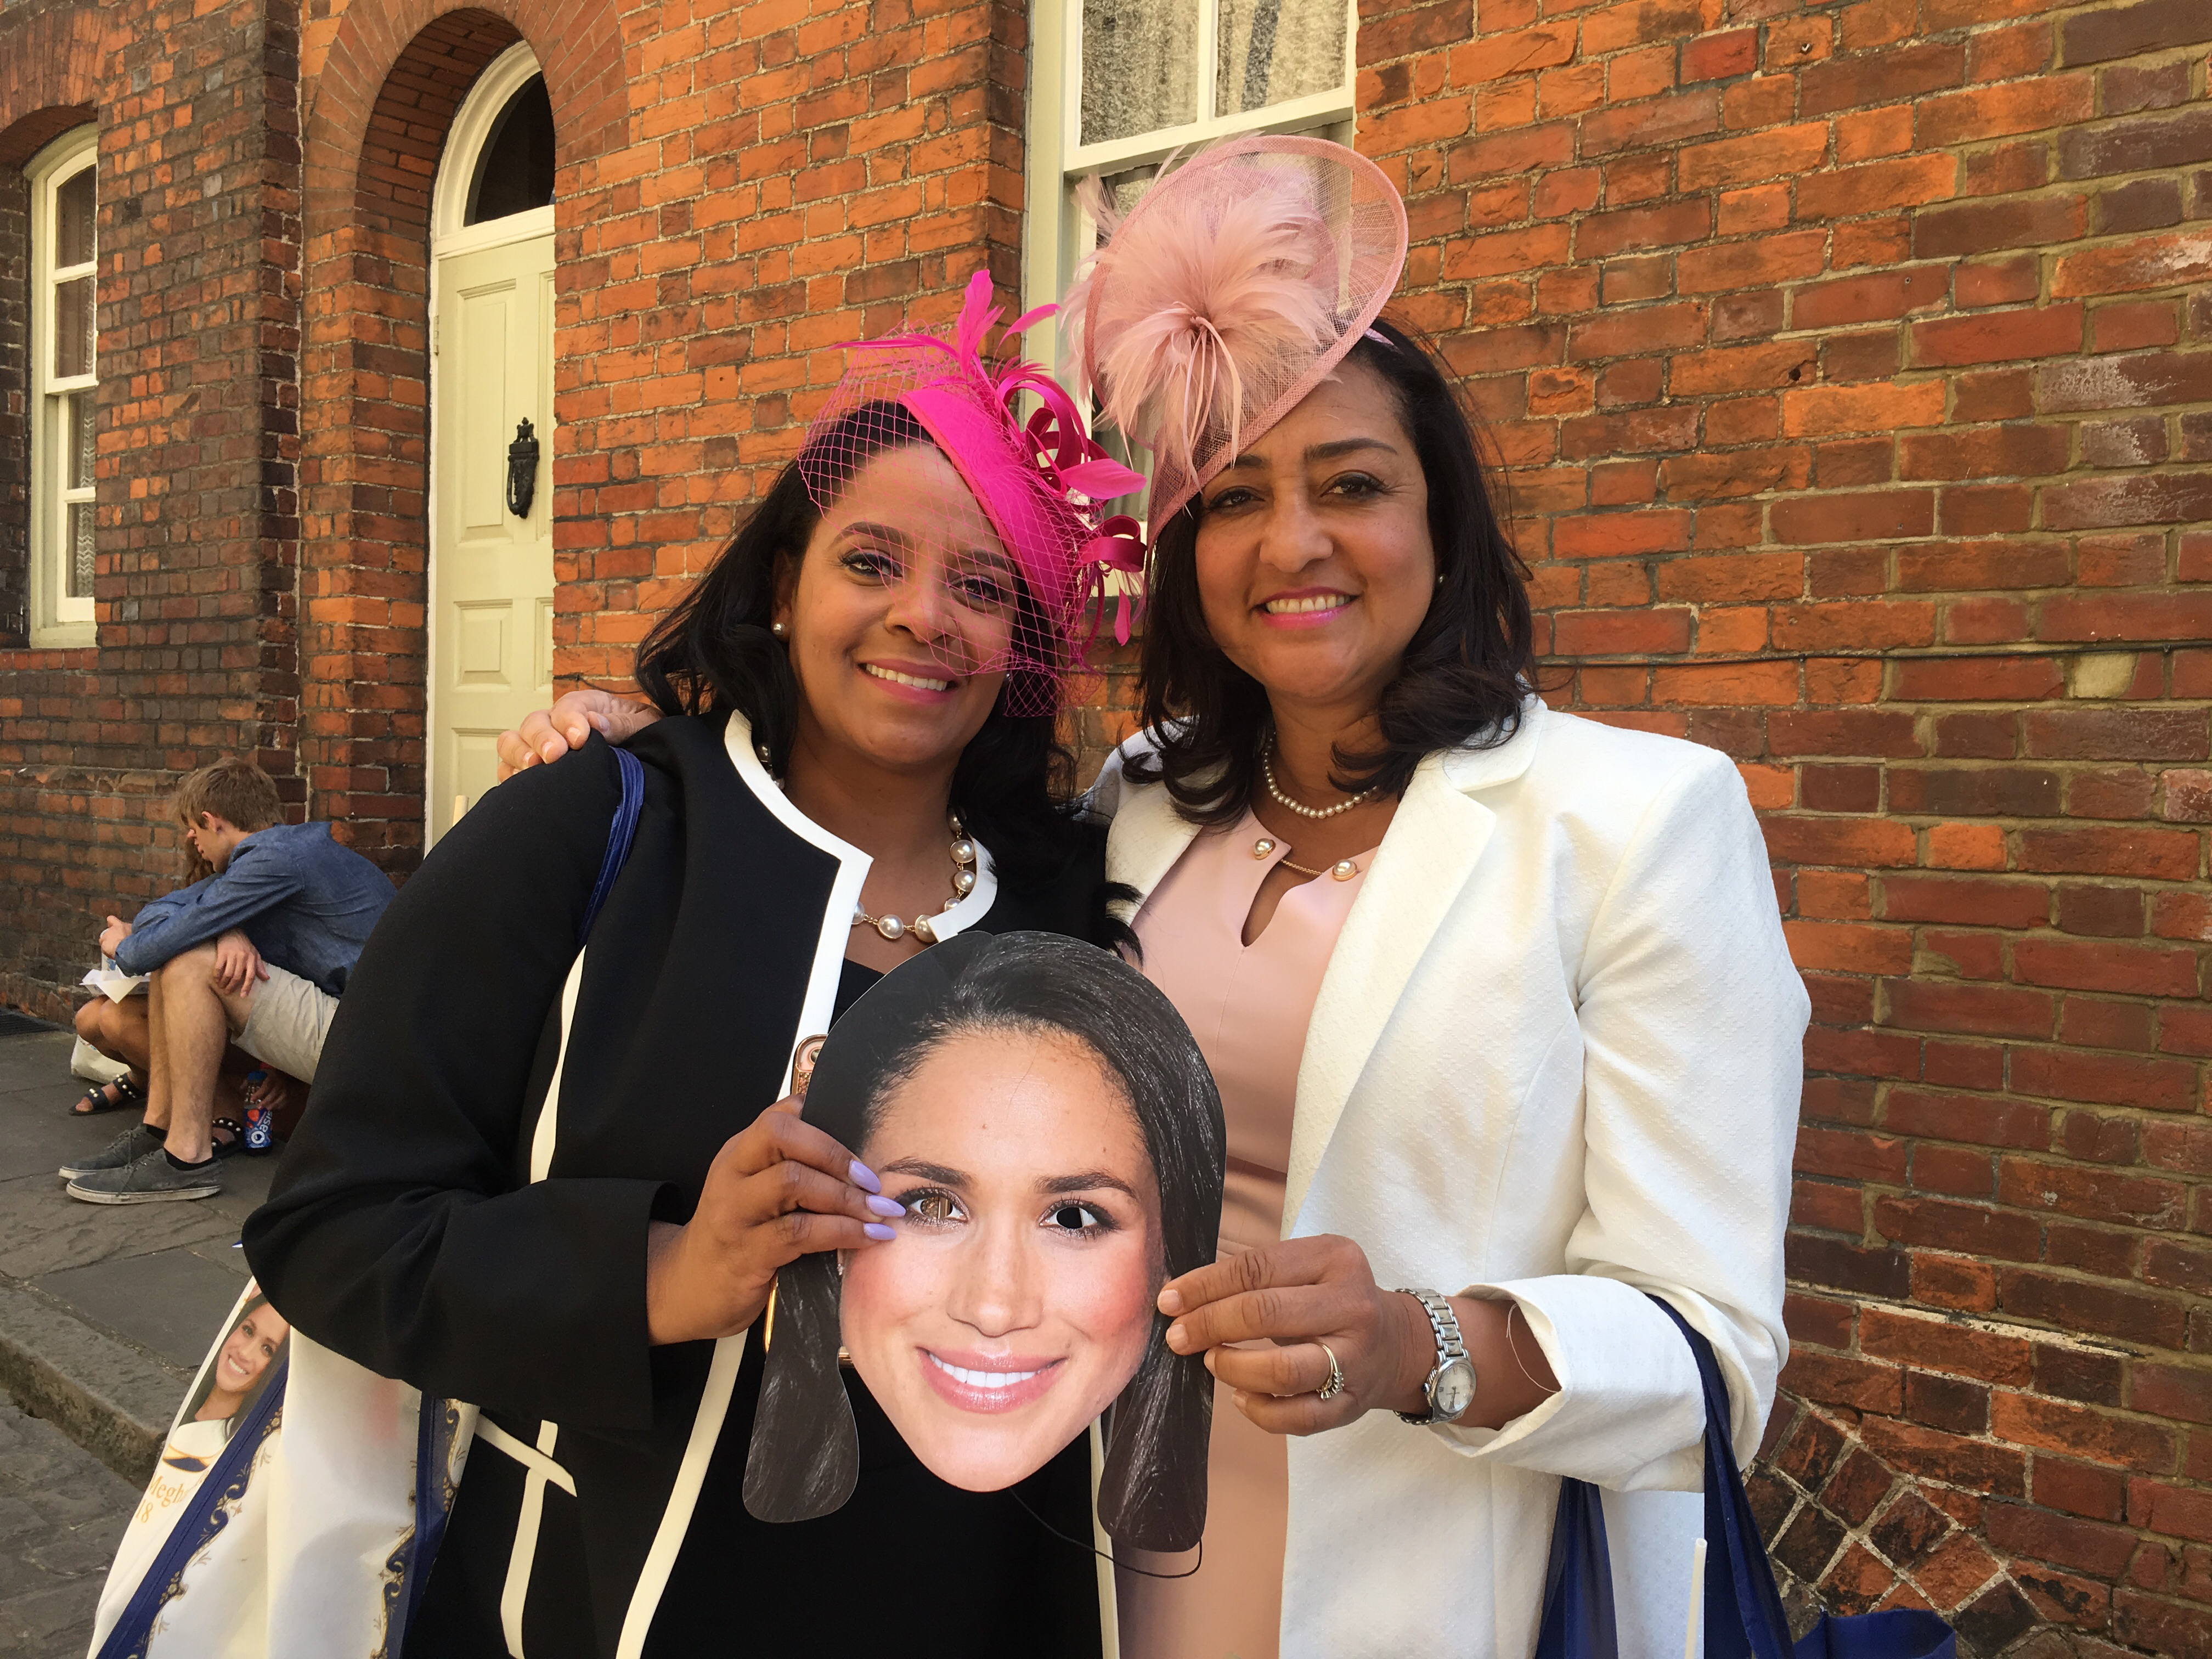 Raven Debose and Melanie Felton in Windsor following the marriage ceremony of Prince Harry and Meghan Markle, on May 19 2018. (Kate Samuelson–TIME)